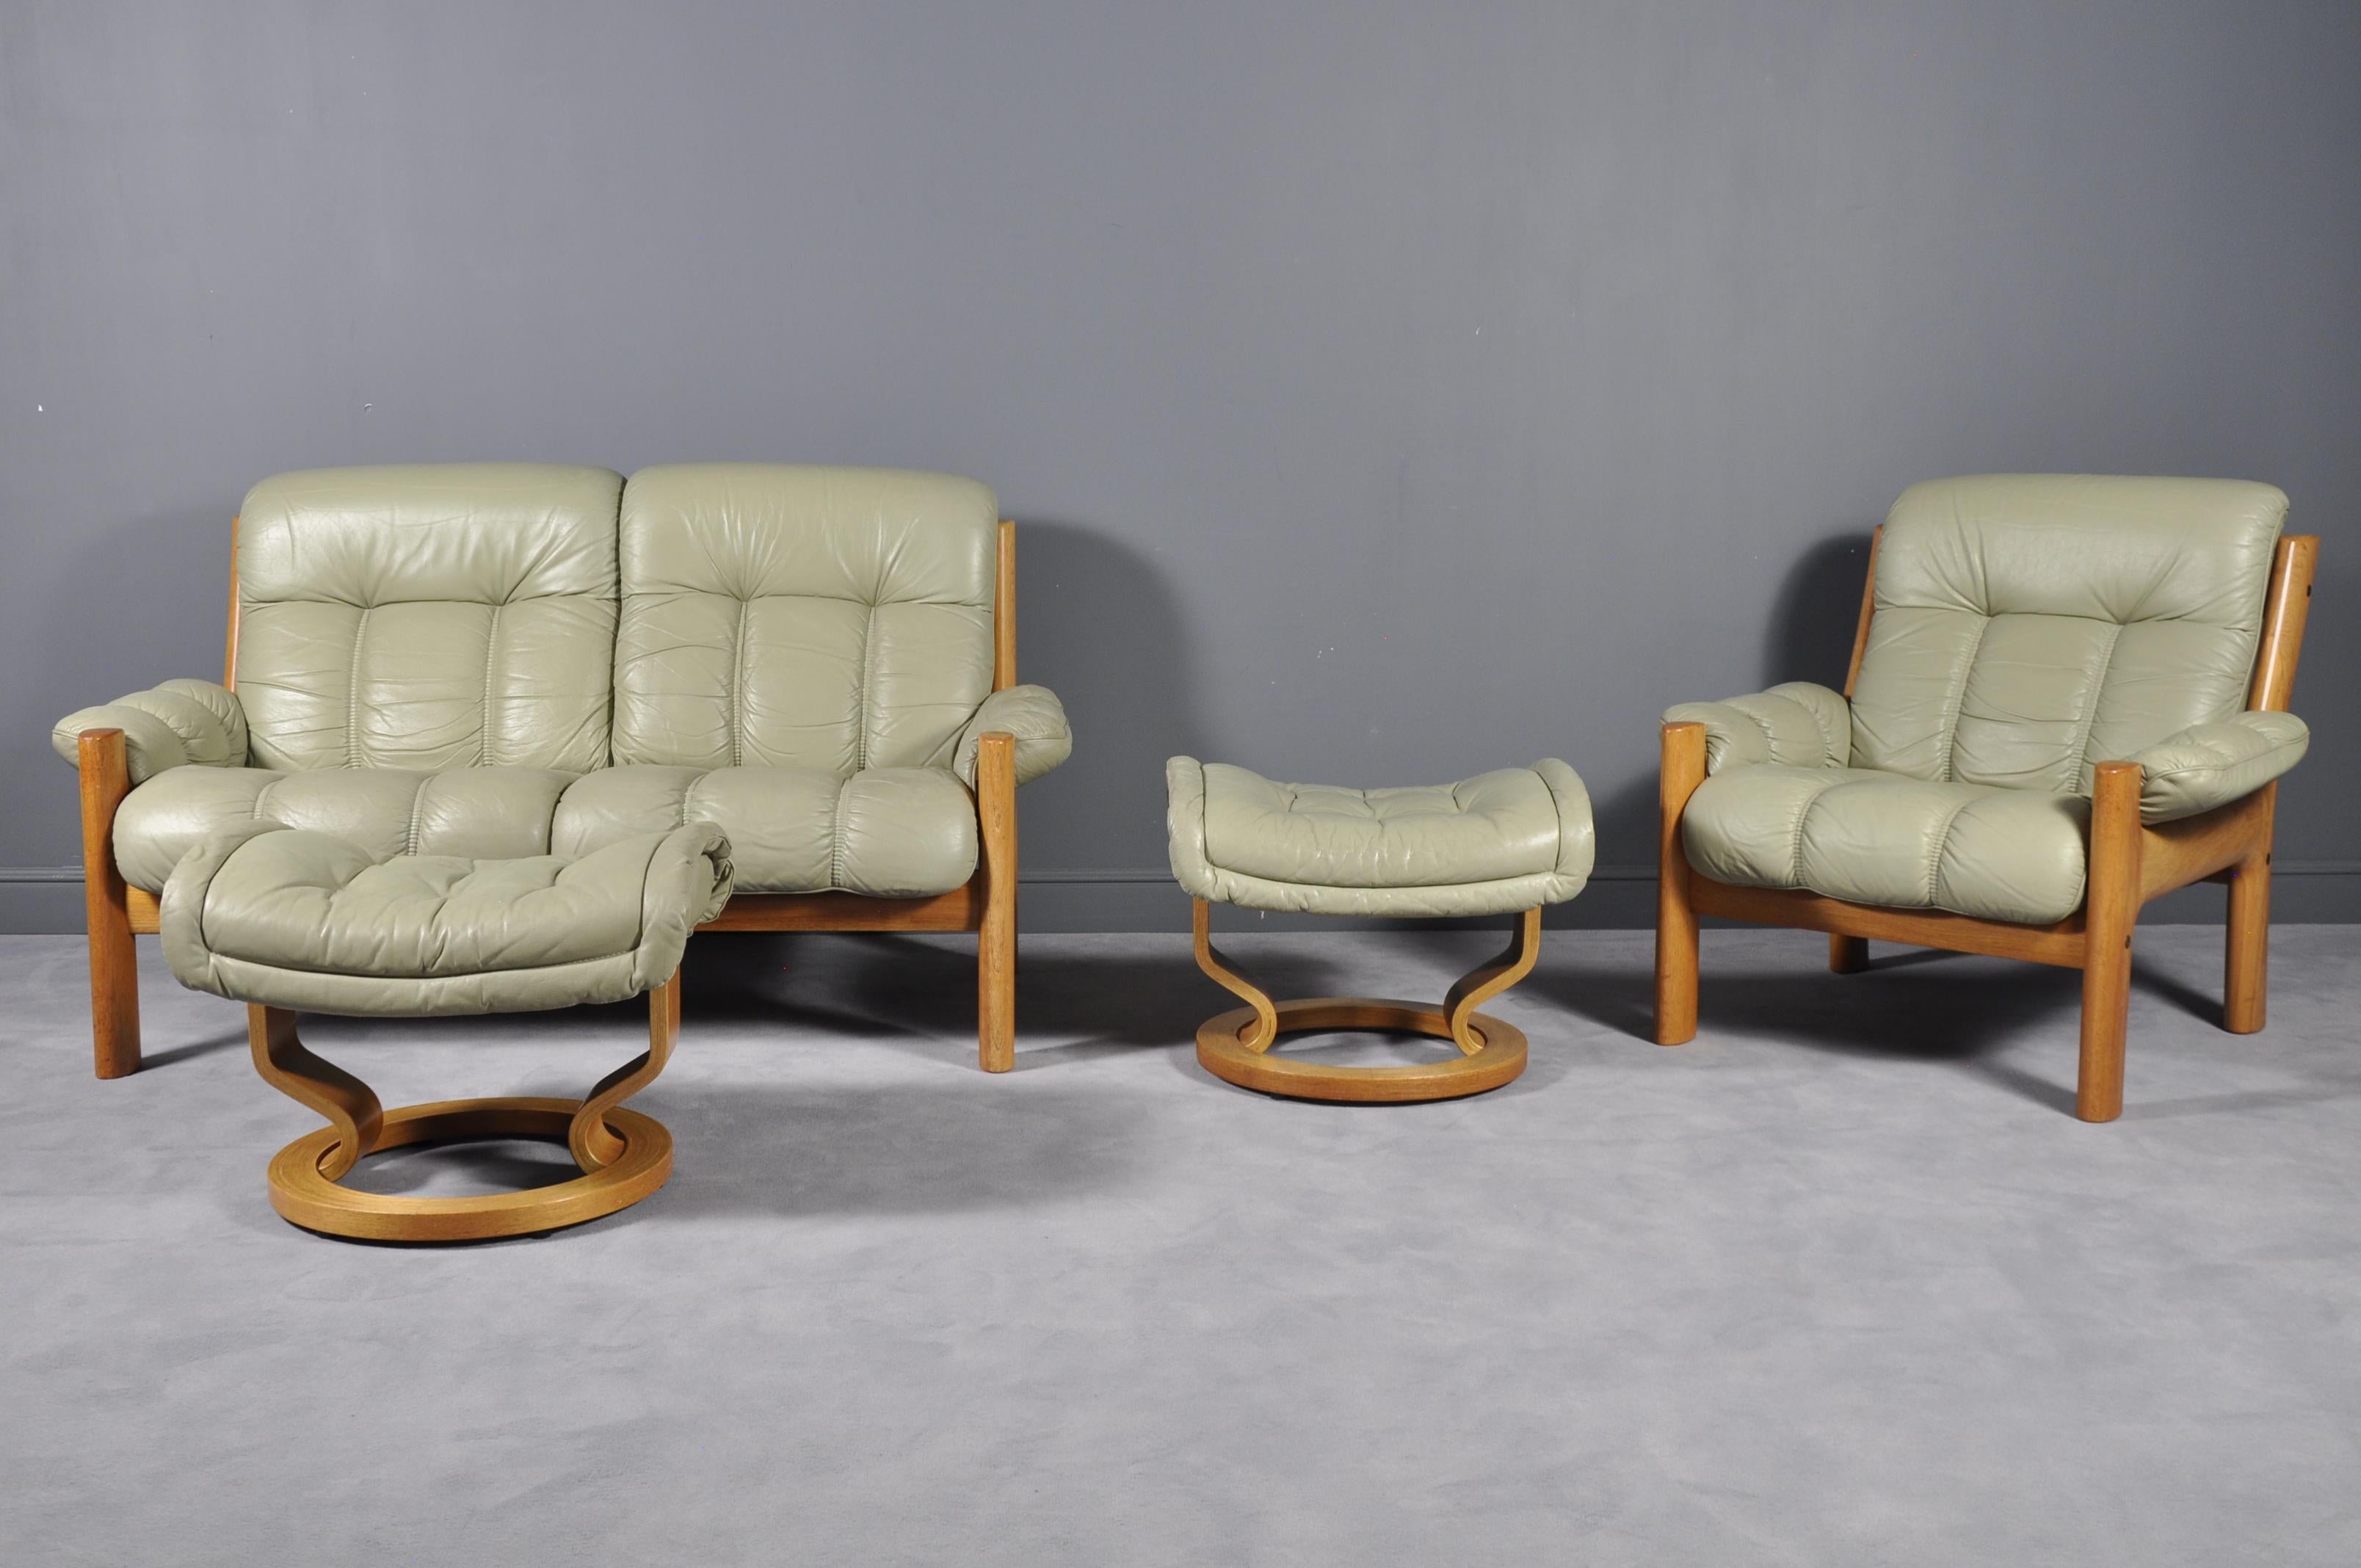 Montana Leather Lounge Chair and Ottoman by J.E. Ekornes, Norway, circa 1970s For Sale 5